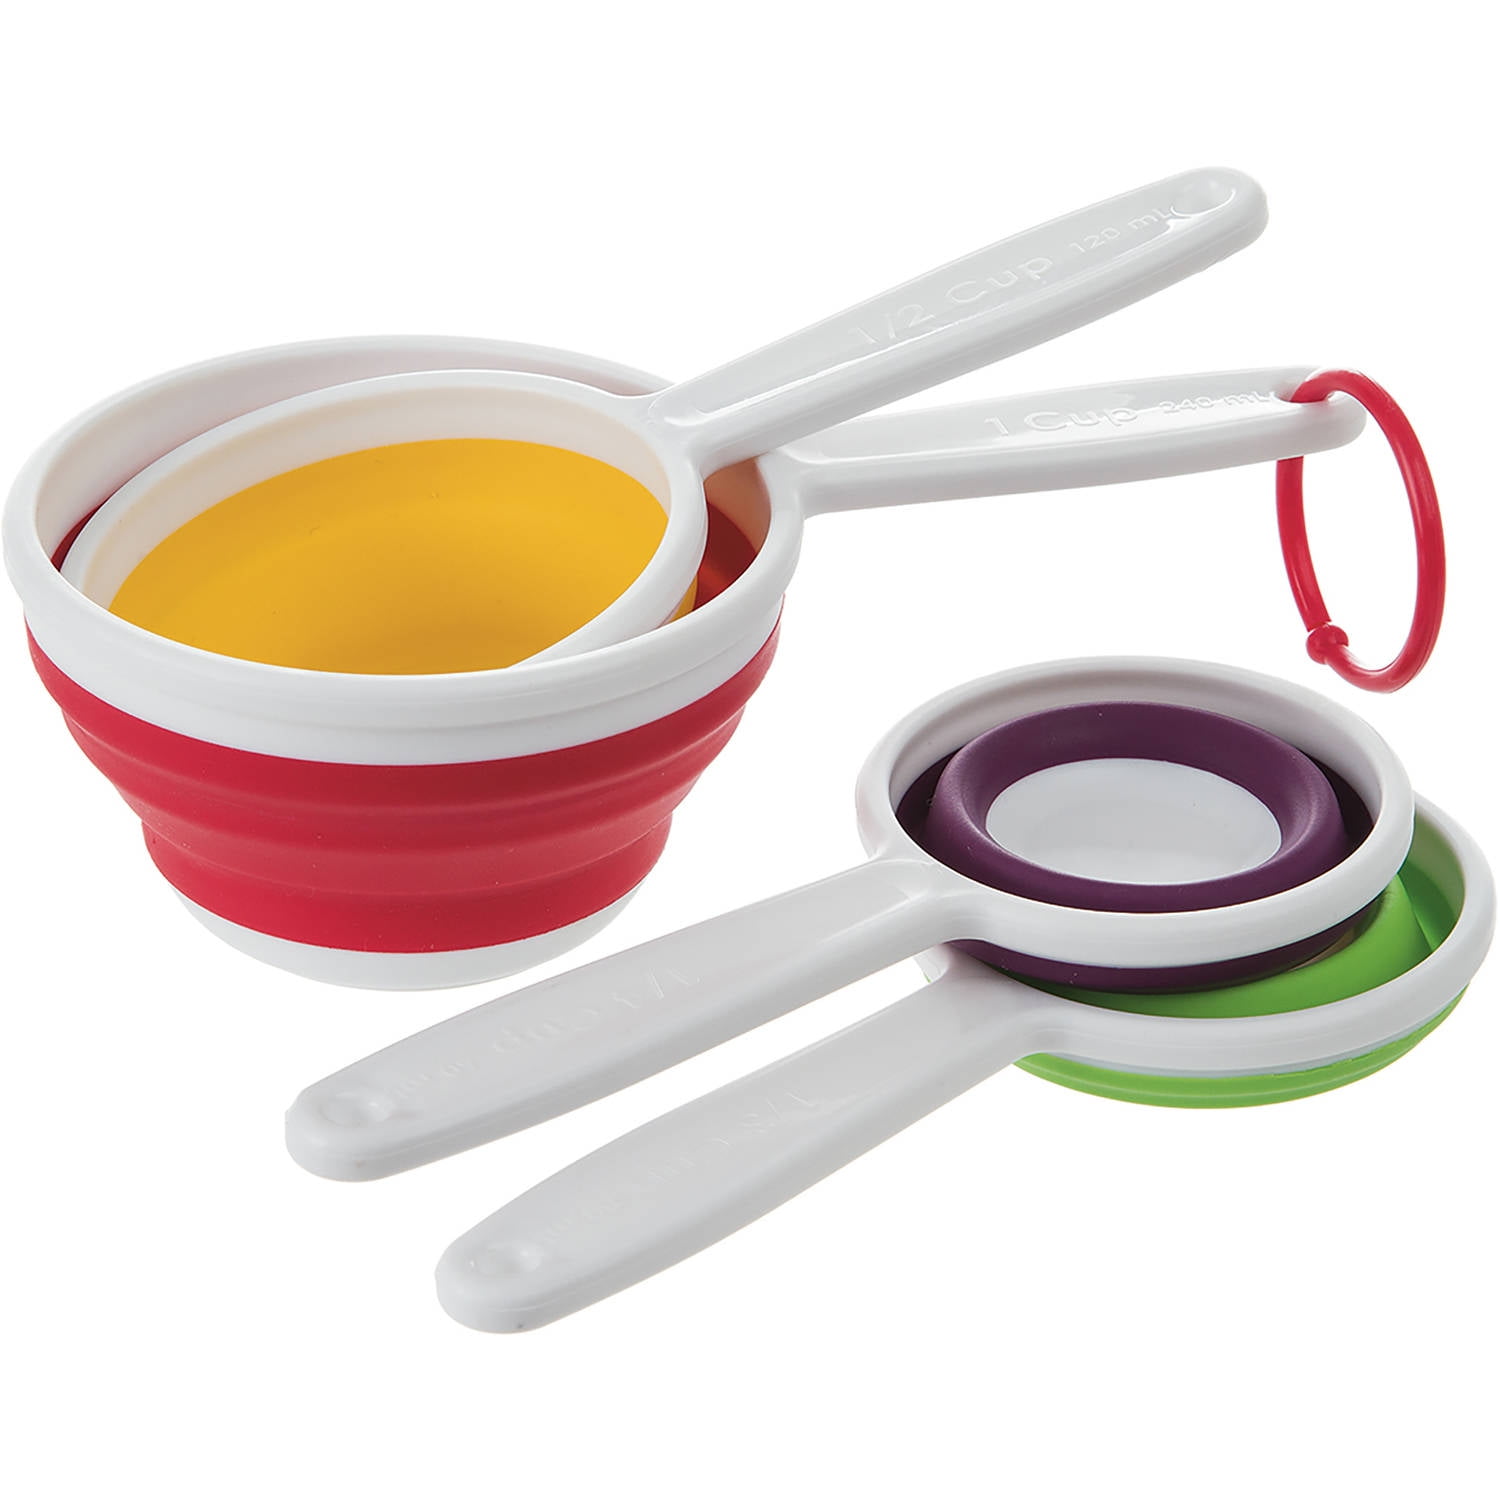 Progressive International Prepworks by Progressive Collapsible Measuring  Cups - Set of 5, Space Saving Collapsible, Great For Narrow Containers